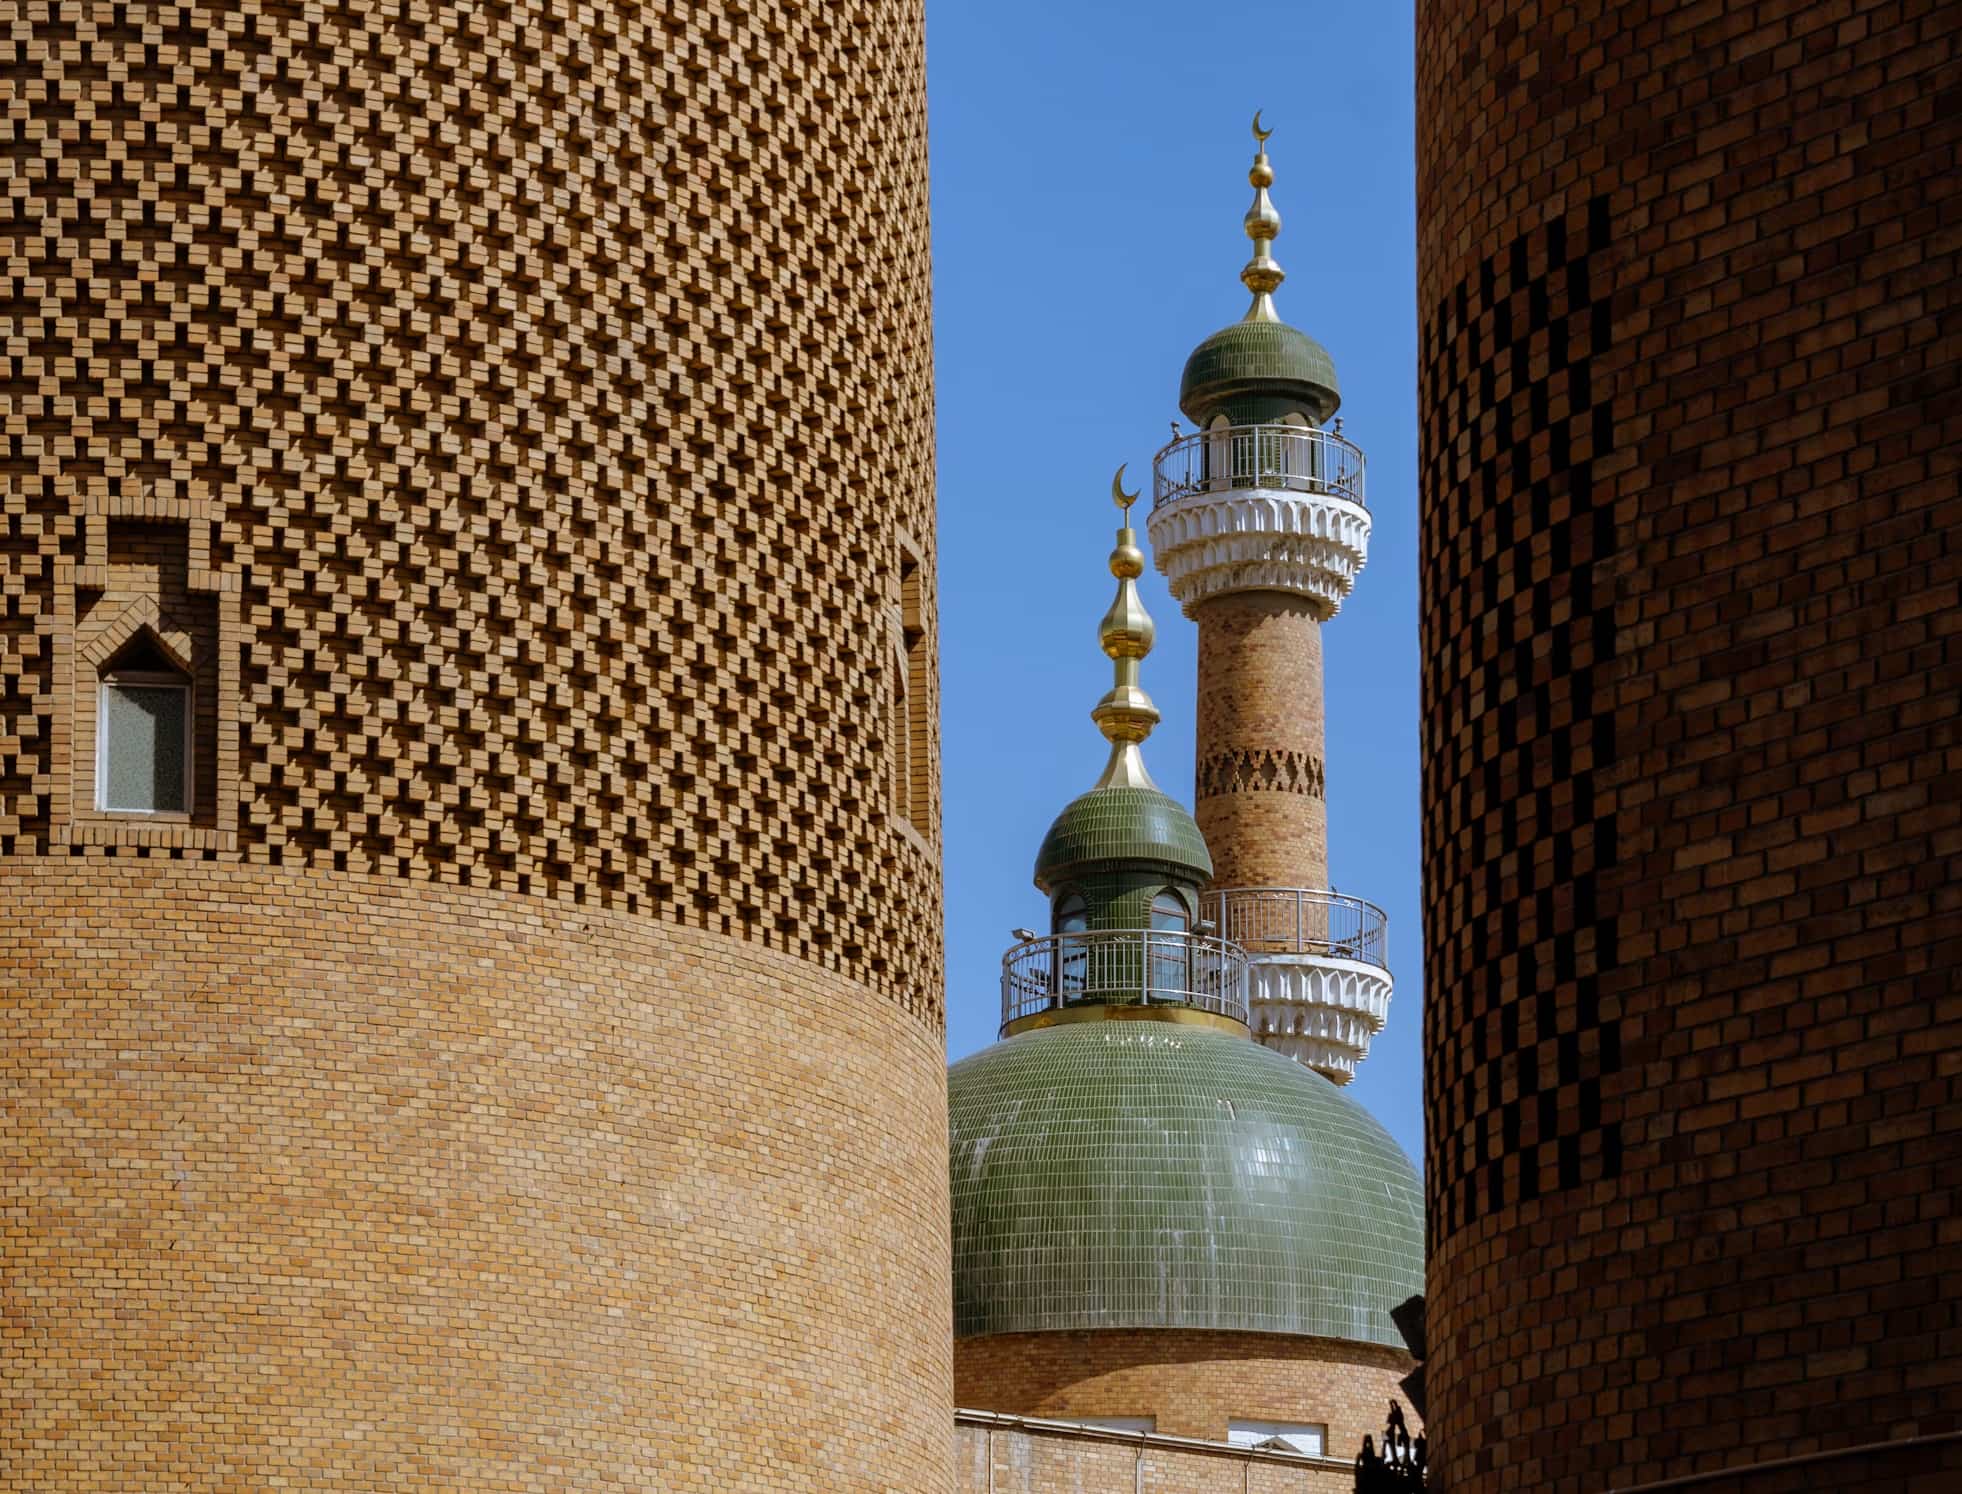 Report: China Closing Mosques in Northern Regions